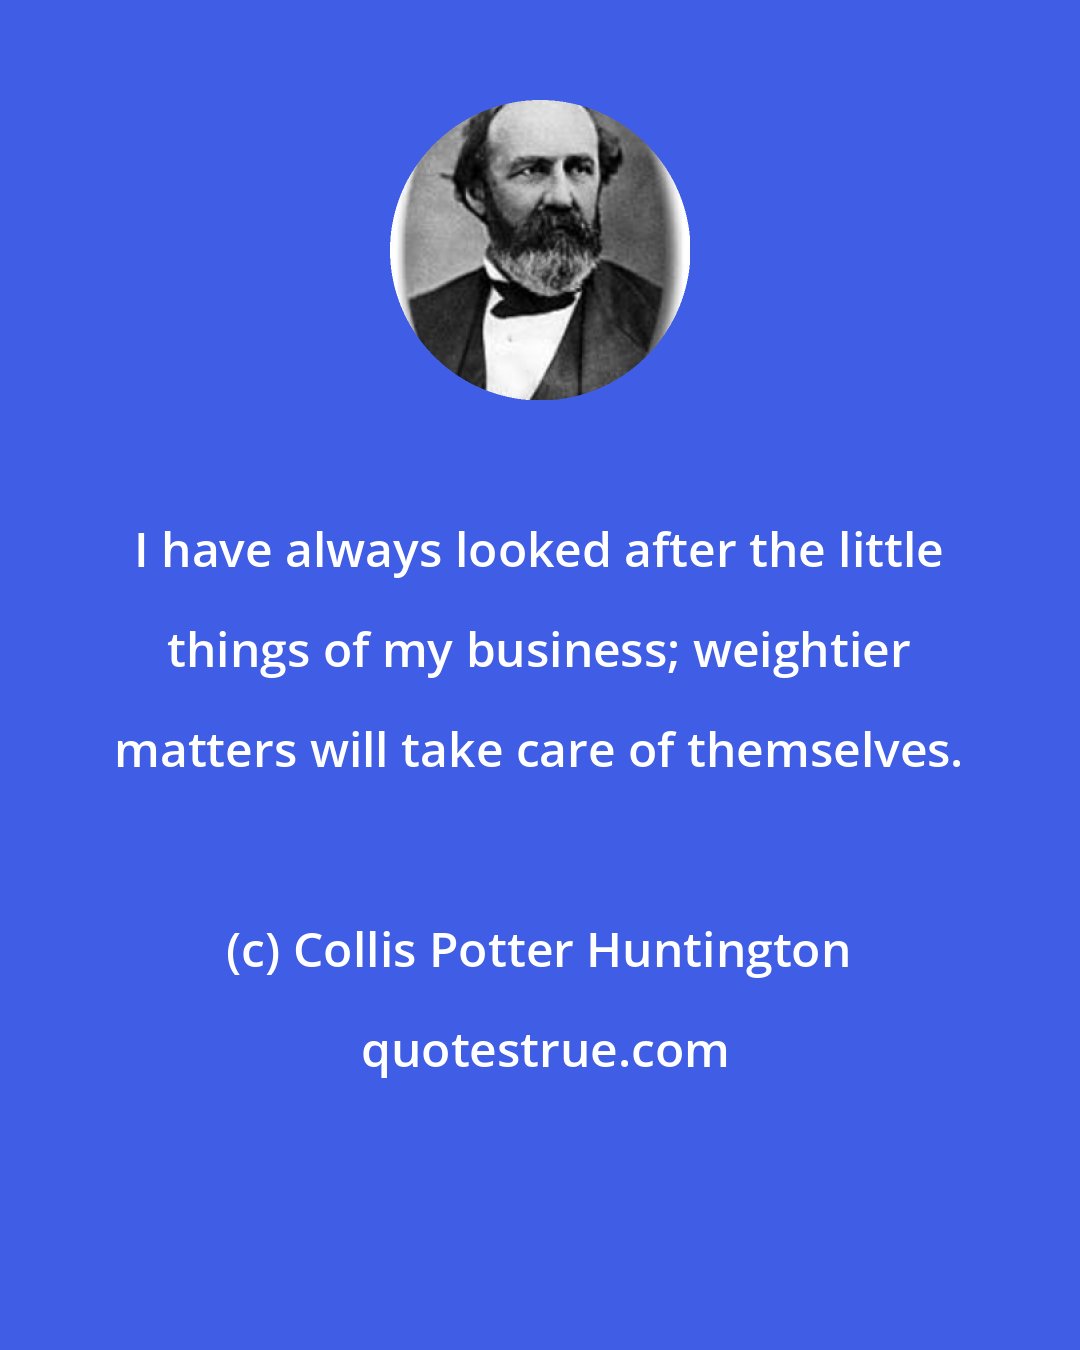 Collis Potter Huntington: I have always looked after the little things of my business; weightier matters will take care of themselves.